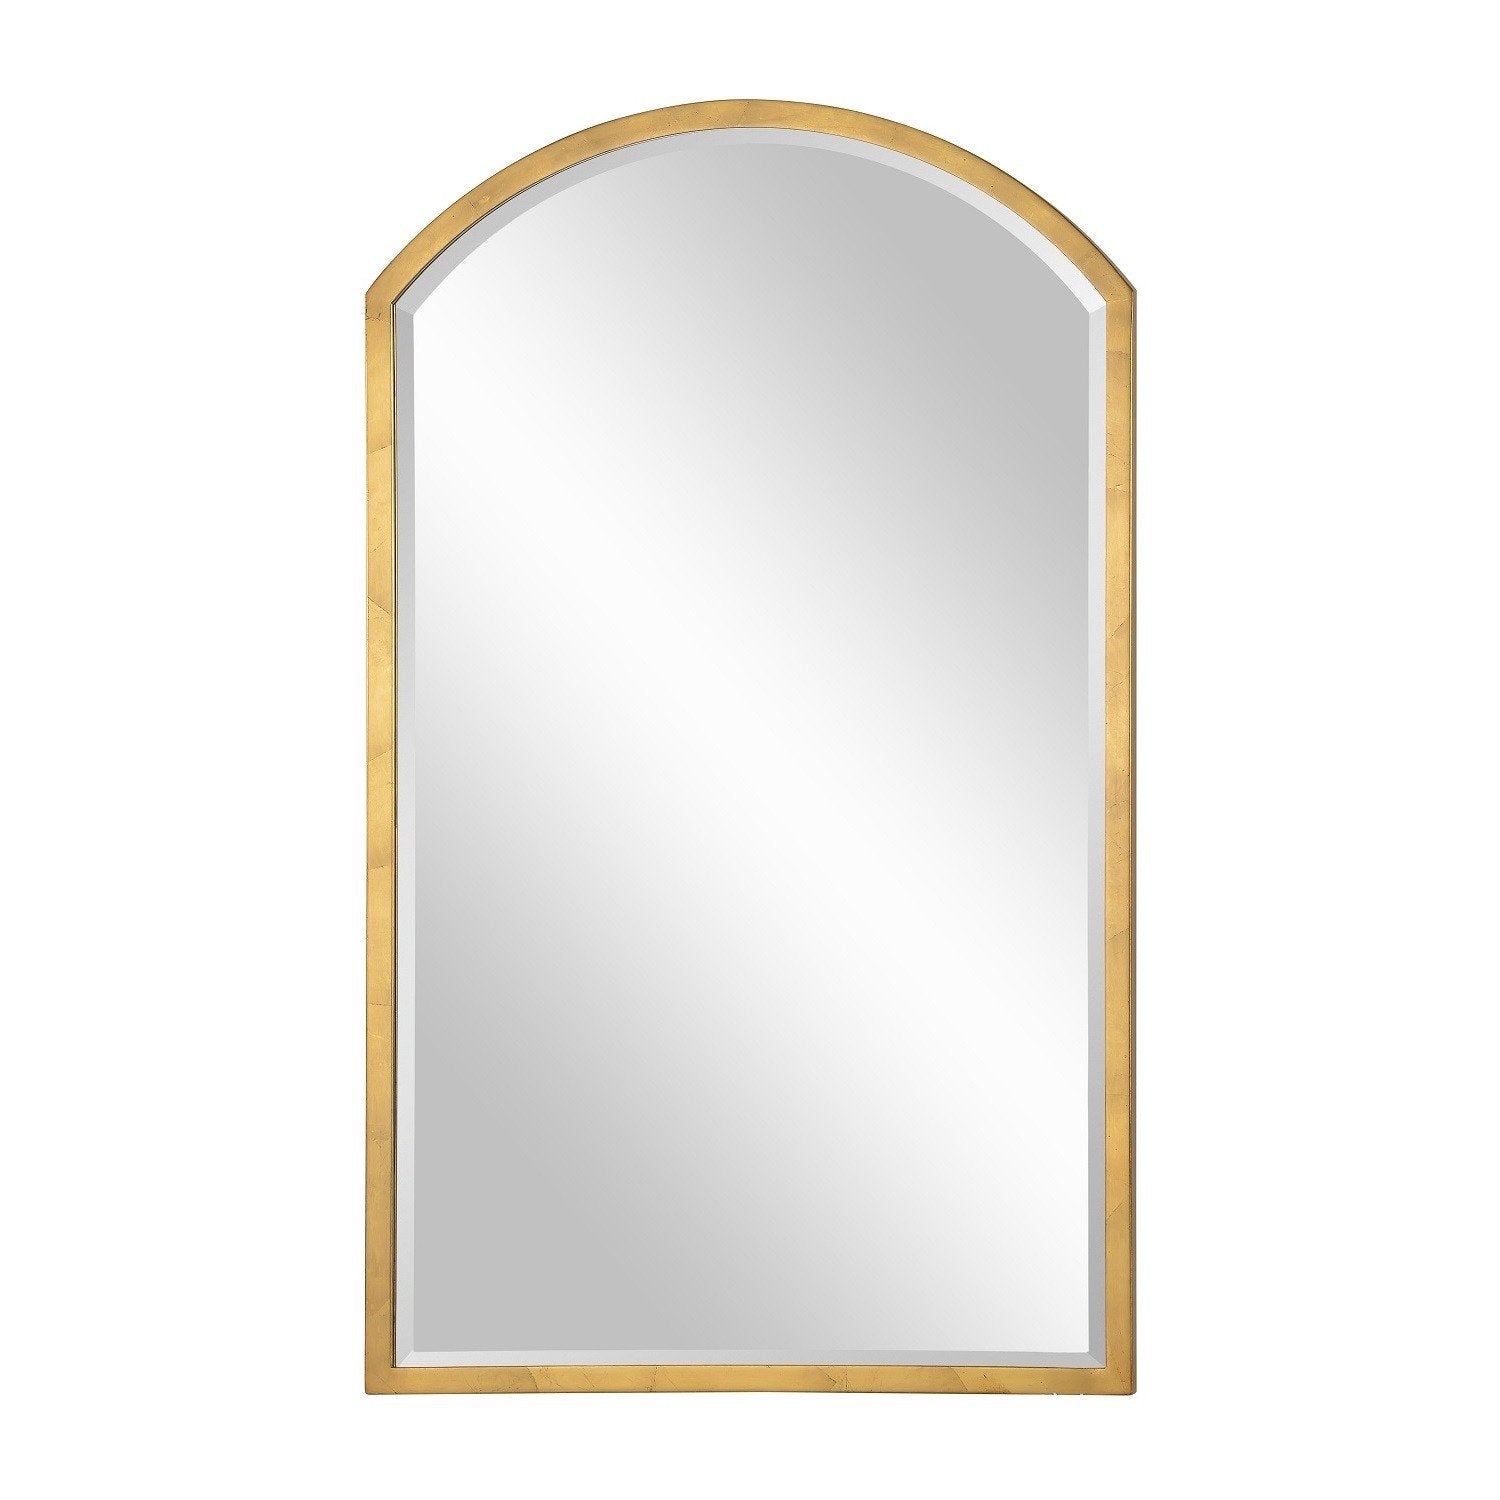 Fig Linens - Mirror Image Home - Distressed Gold Arched Wall Mirror 